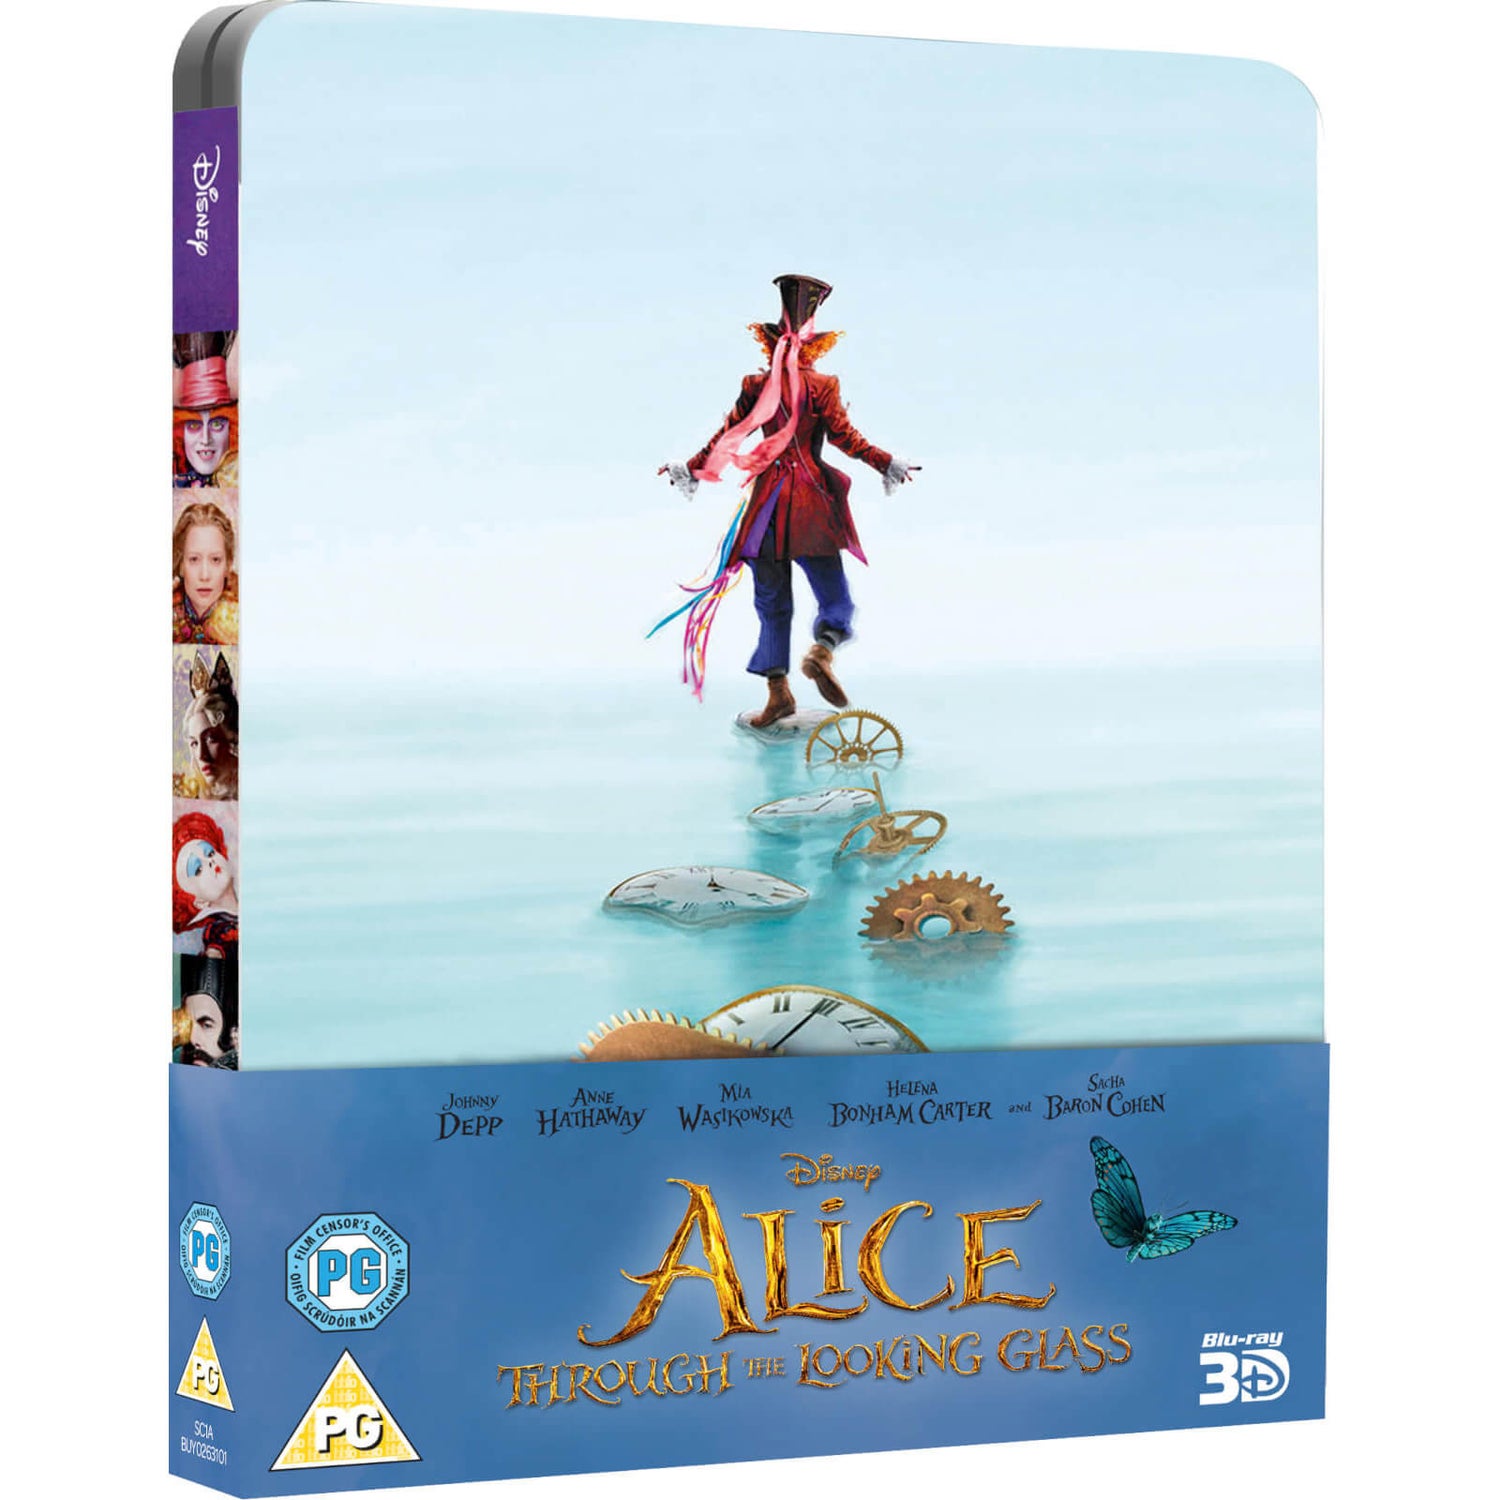 Alice Through The Looking Glass 3D (Includes 2D Version) - Zavvi UK Exclusive Limited Edition Steelbook